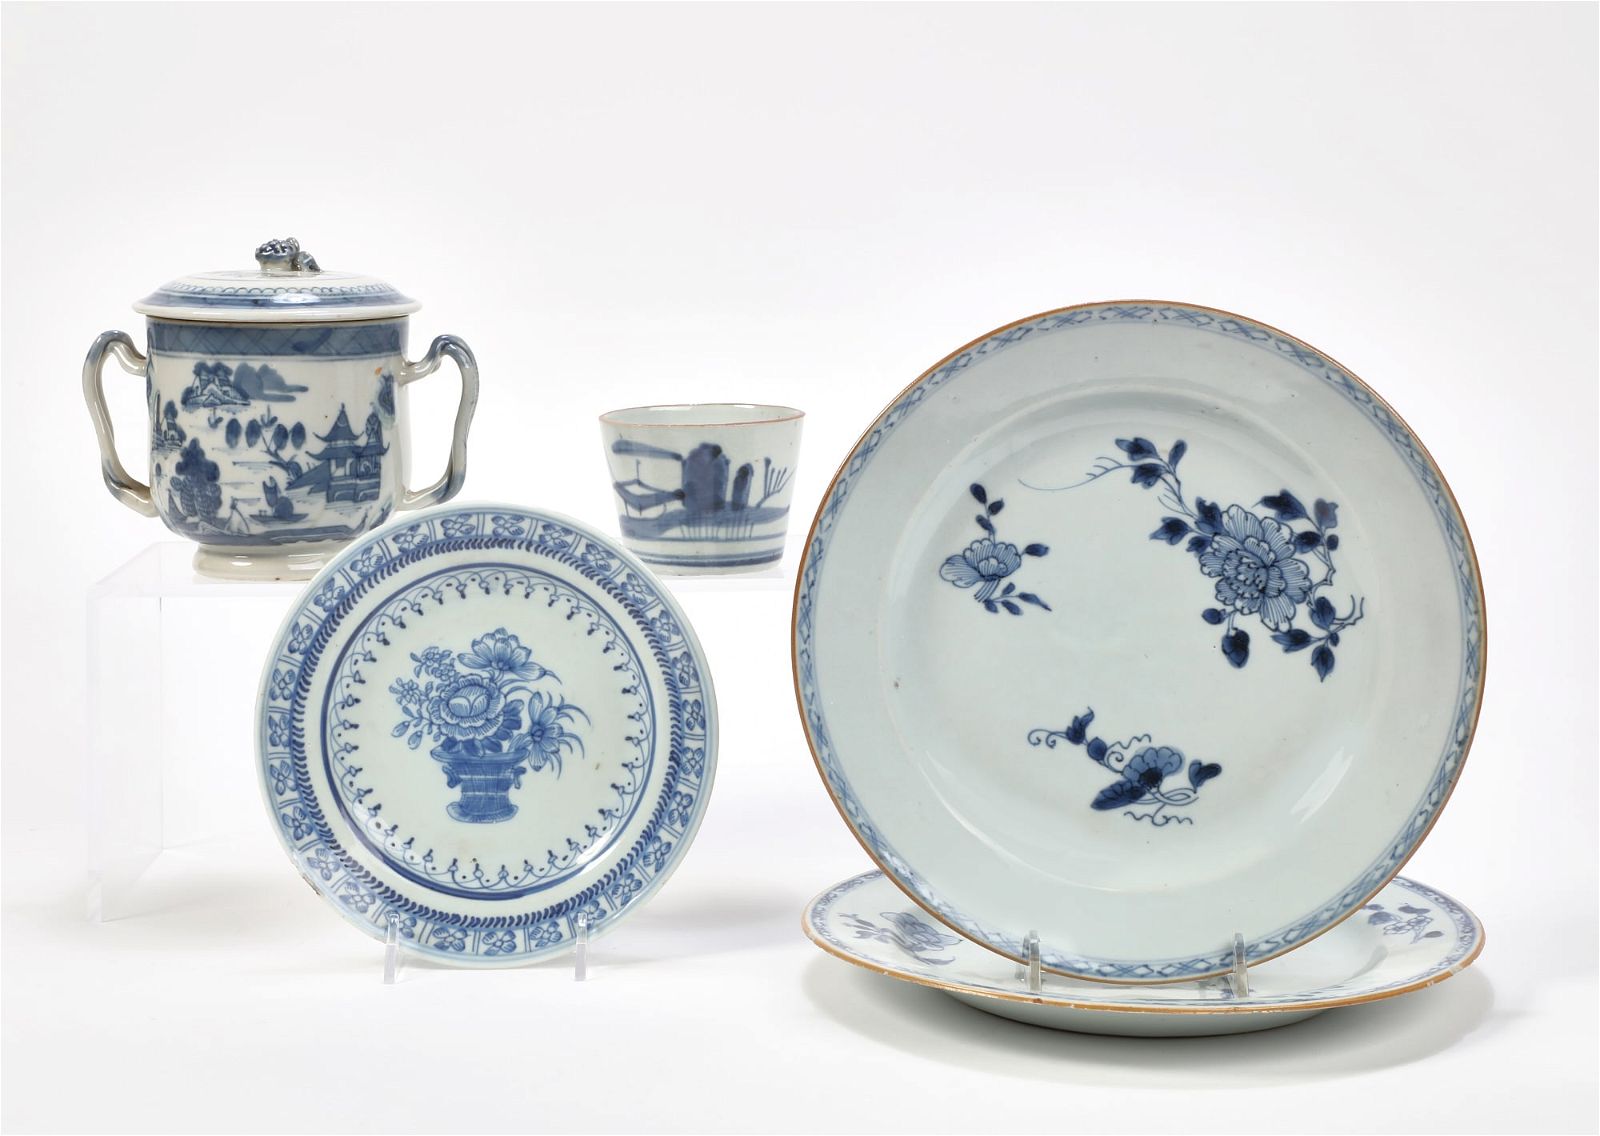 FIVE CHINESE EXPORT PORCELAIN TABLETOP